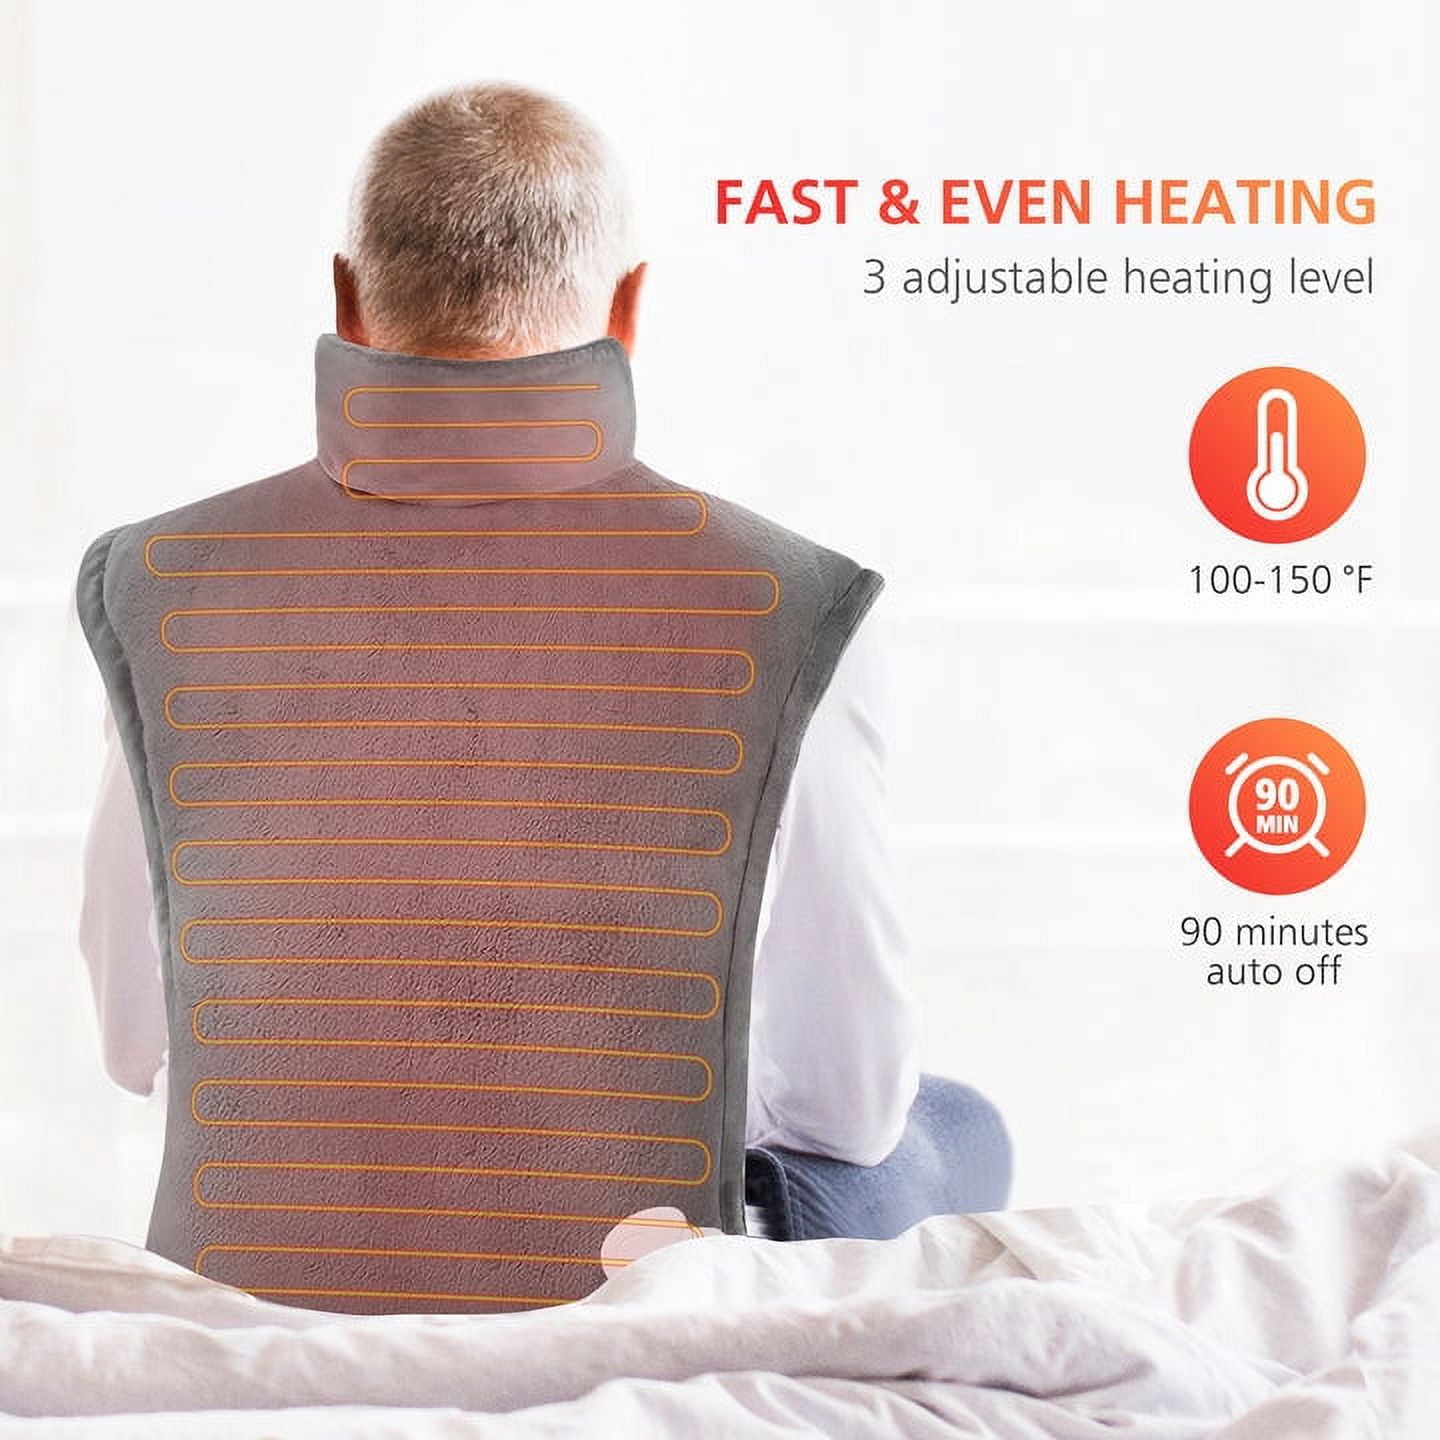 Comfier Heating Pad with Massager, Back Heating Pad for Back Pain Relief  with 2 Heat Levels, Lower Back Massager with 3 Massage Modes, Corded  Heating